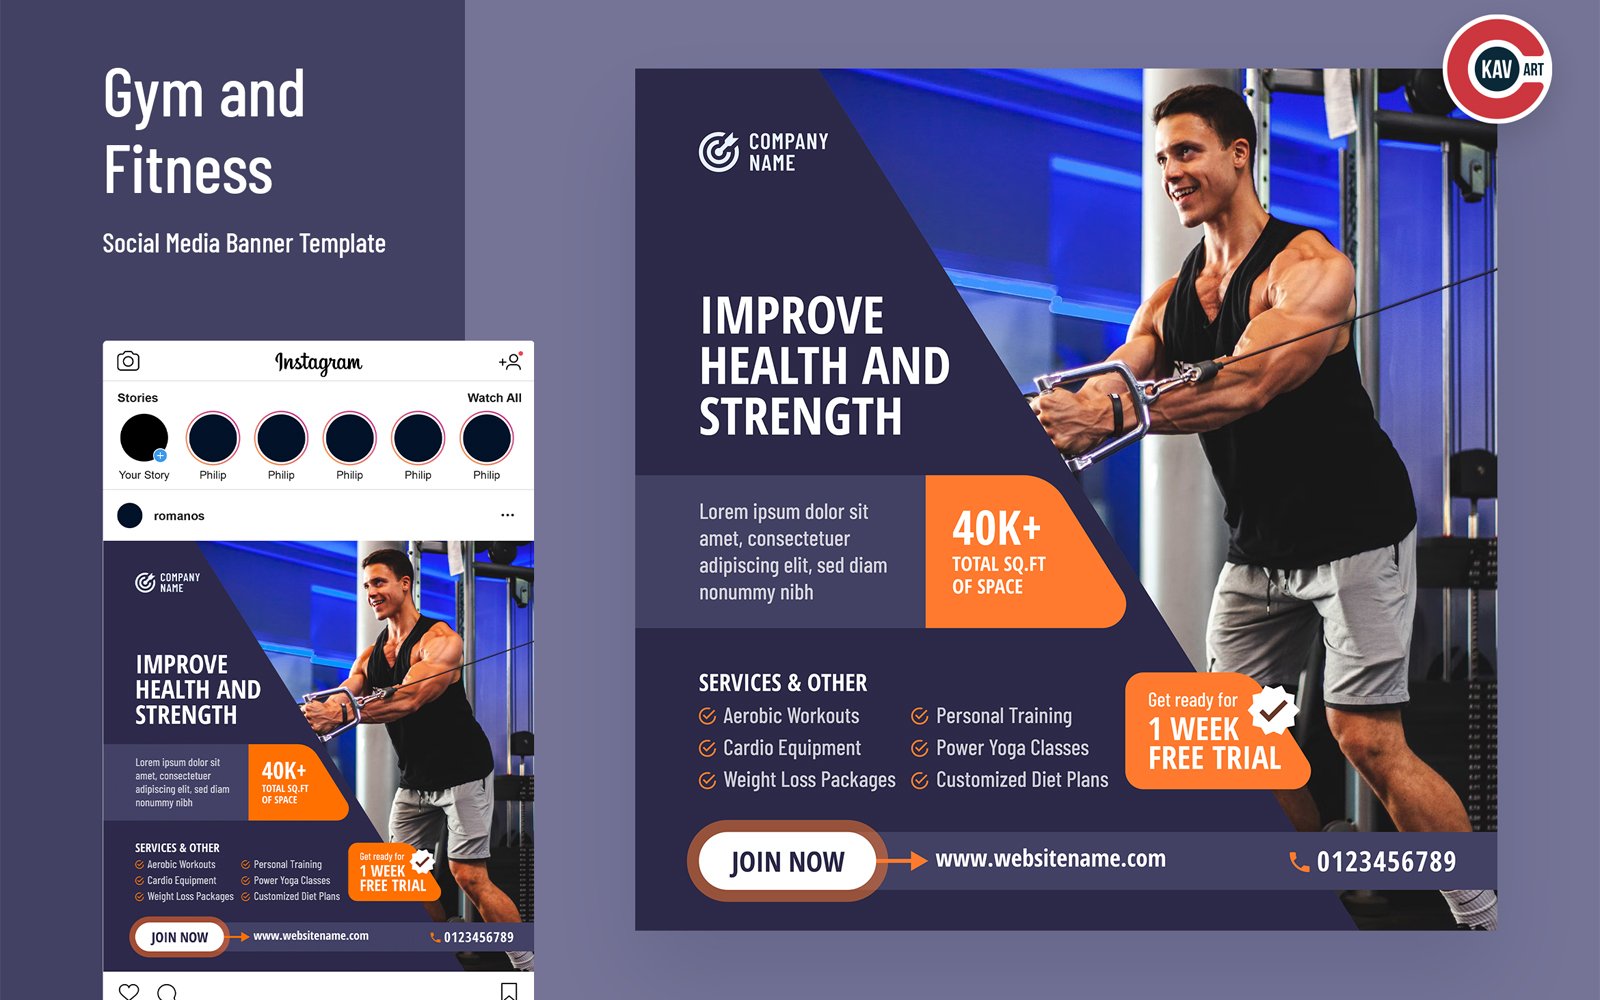 Gym and Fitness Social Media Banner Template - 00252